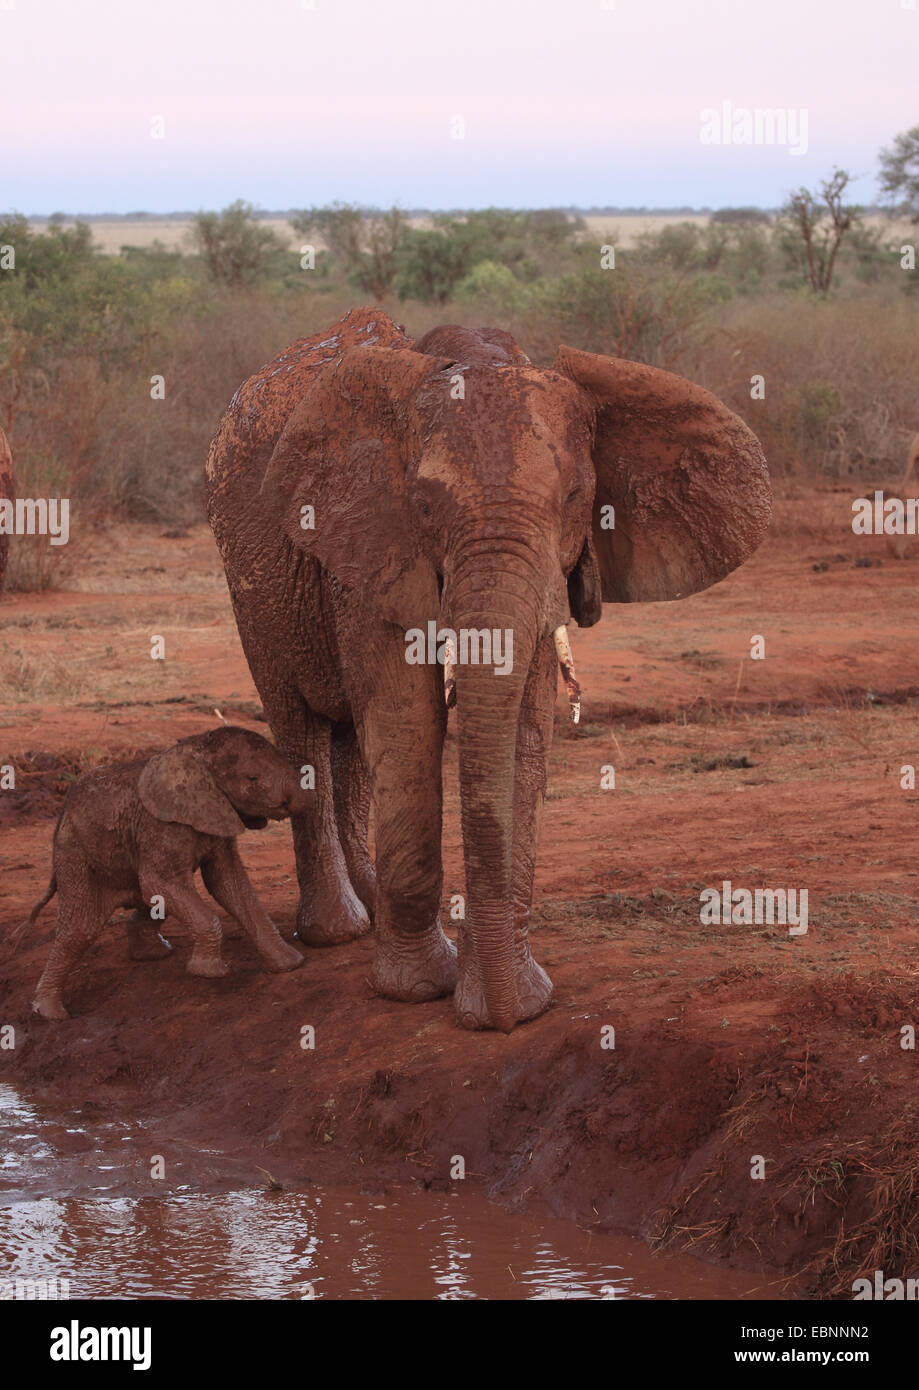 African elephant (Loxodonta africana), juvenile and adult at a water hole in ferrous red soil, Kenya, Tsavo East National Park Stock Photo